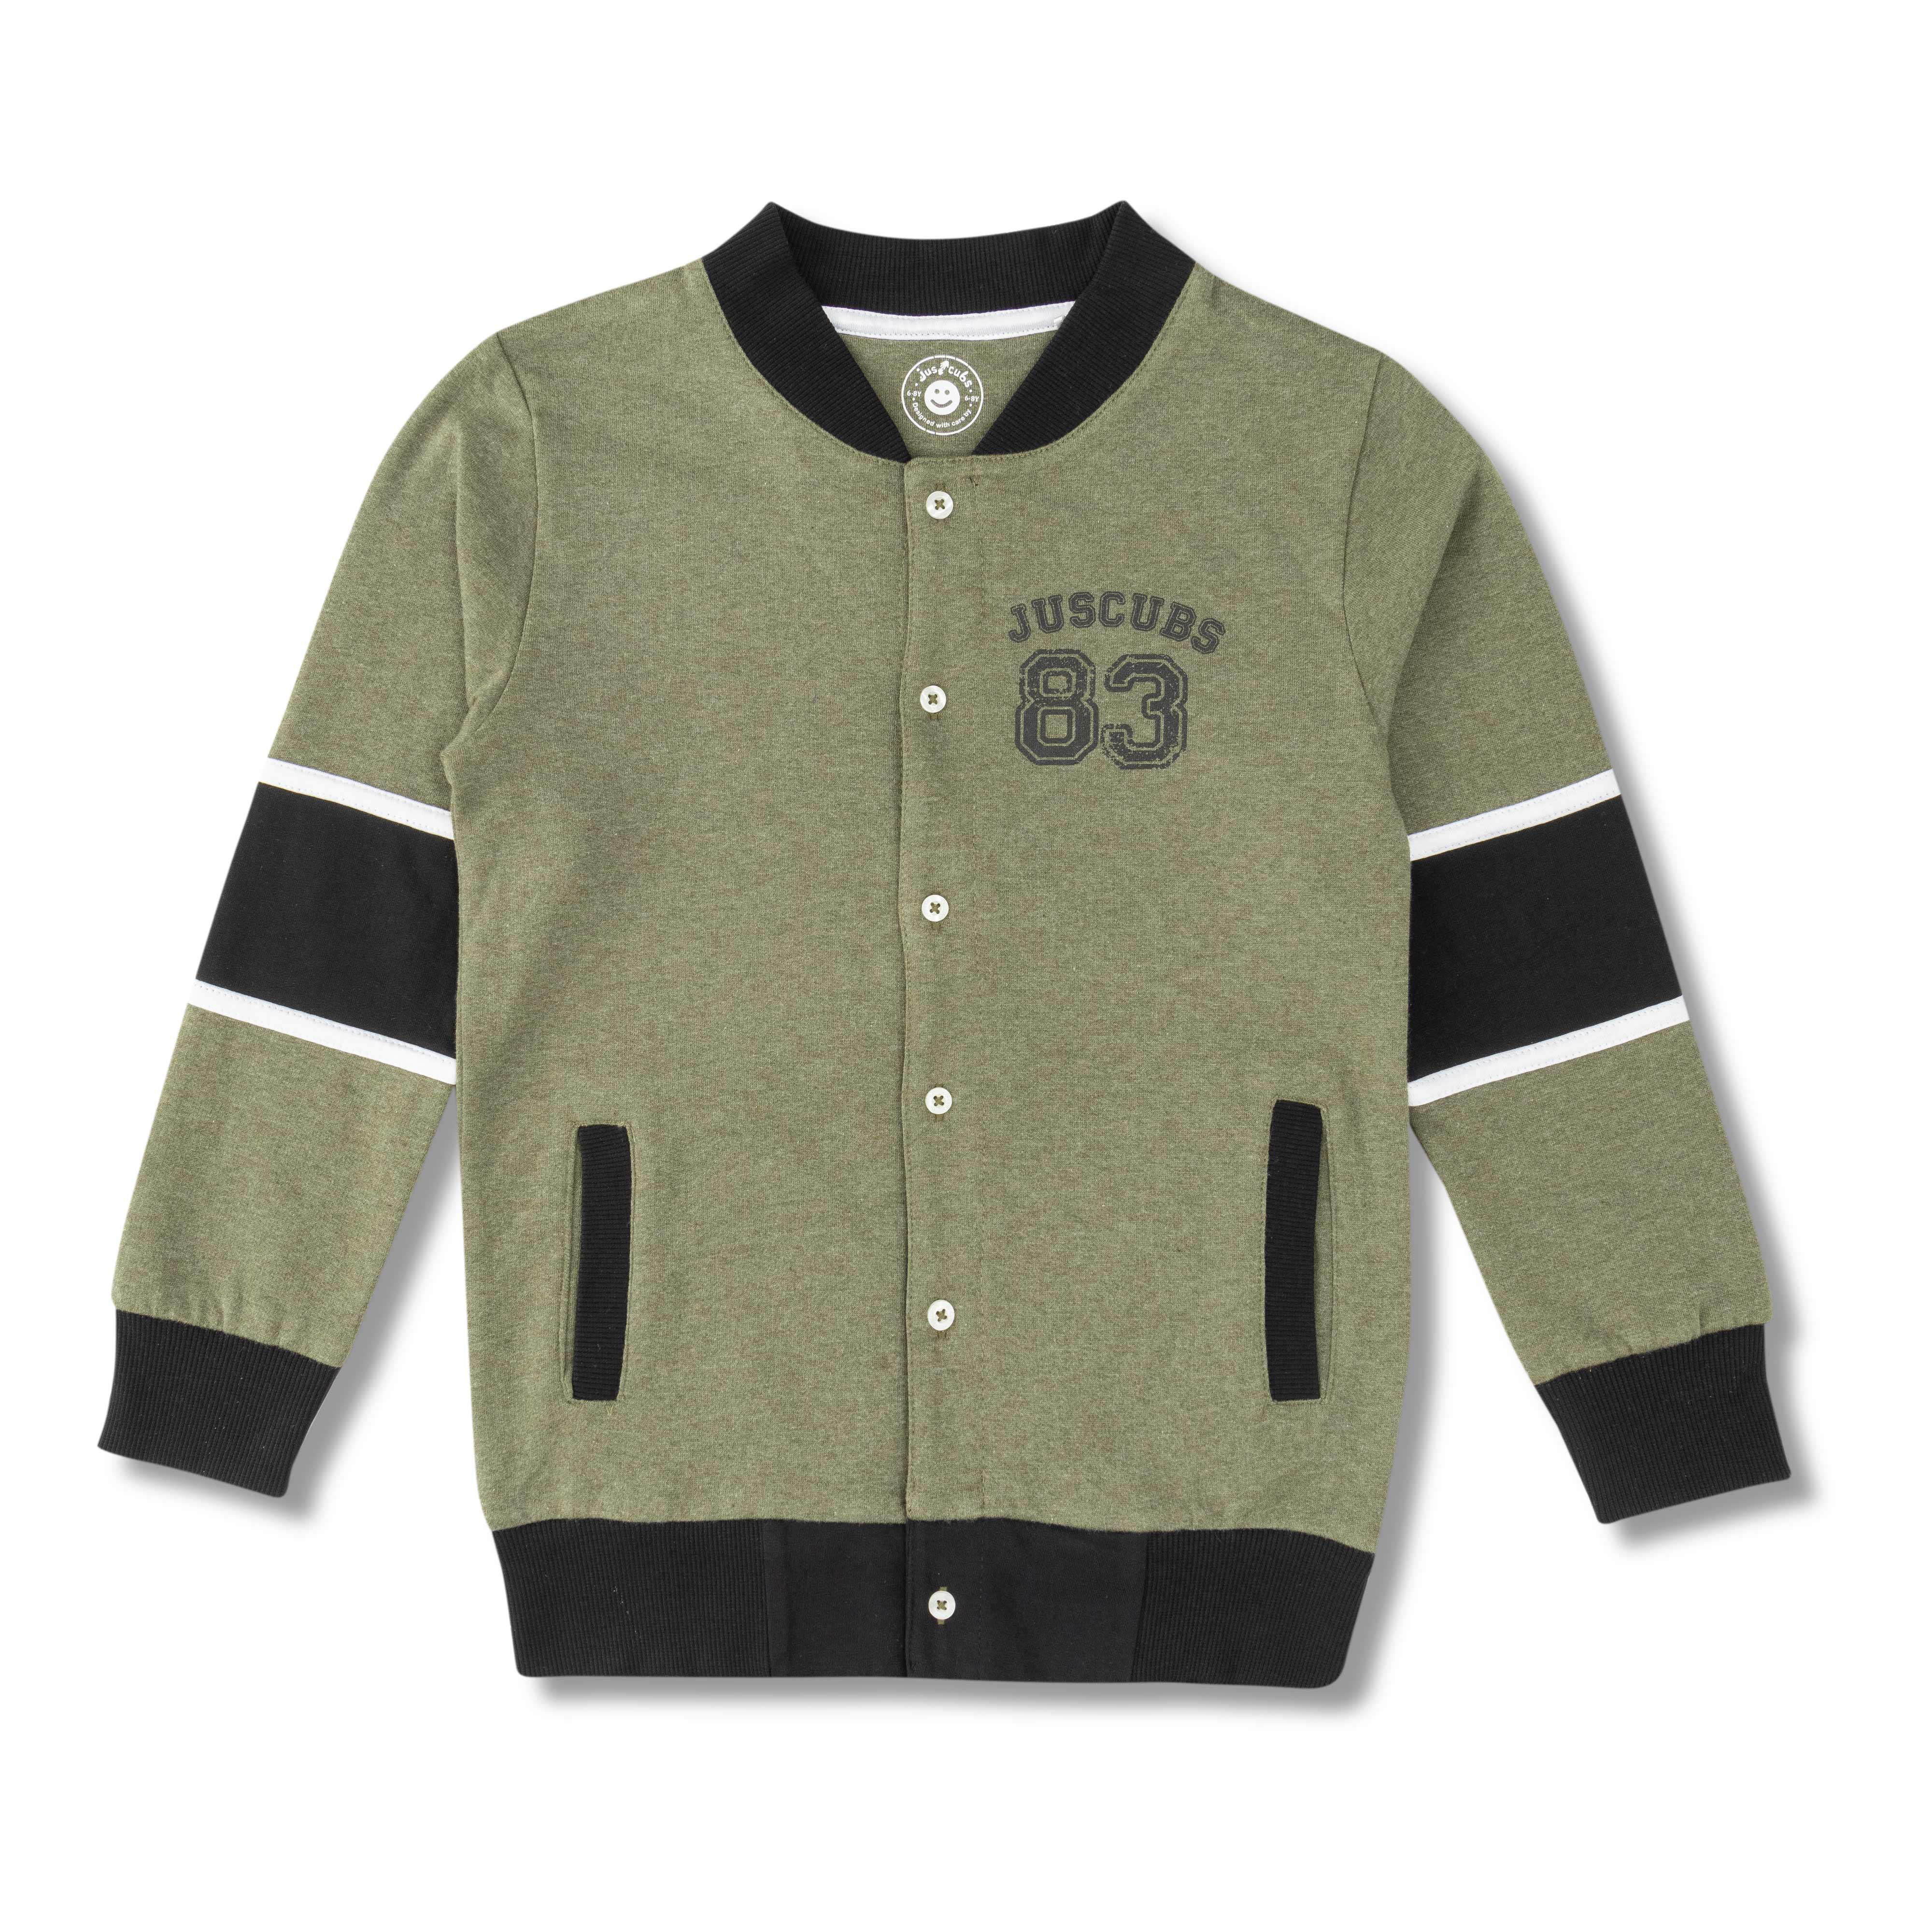 Young Boys Embroidery Full Sleeve Jacket - Juscubs